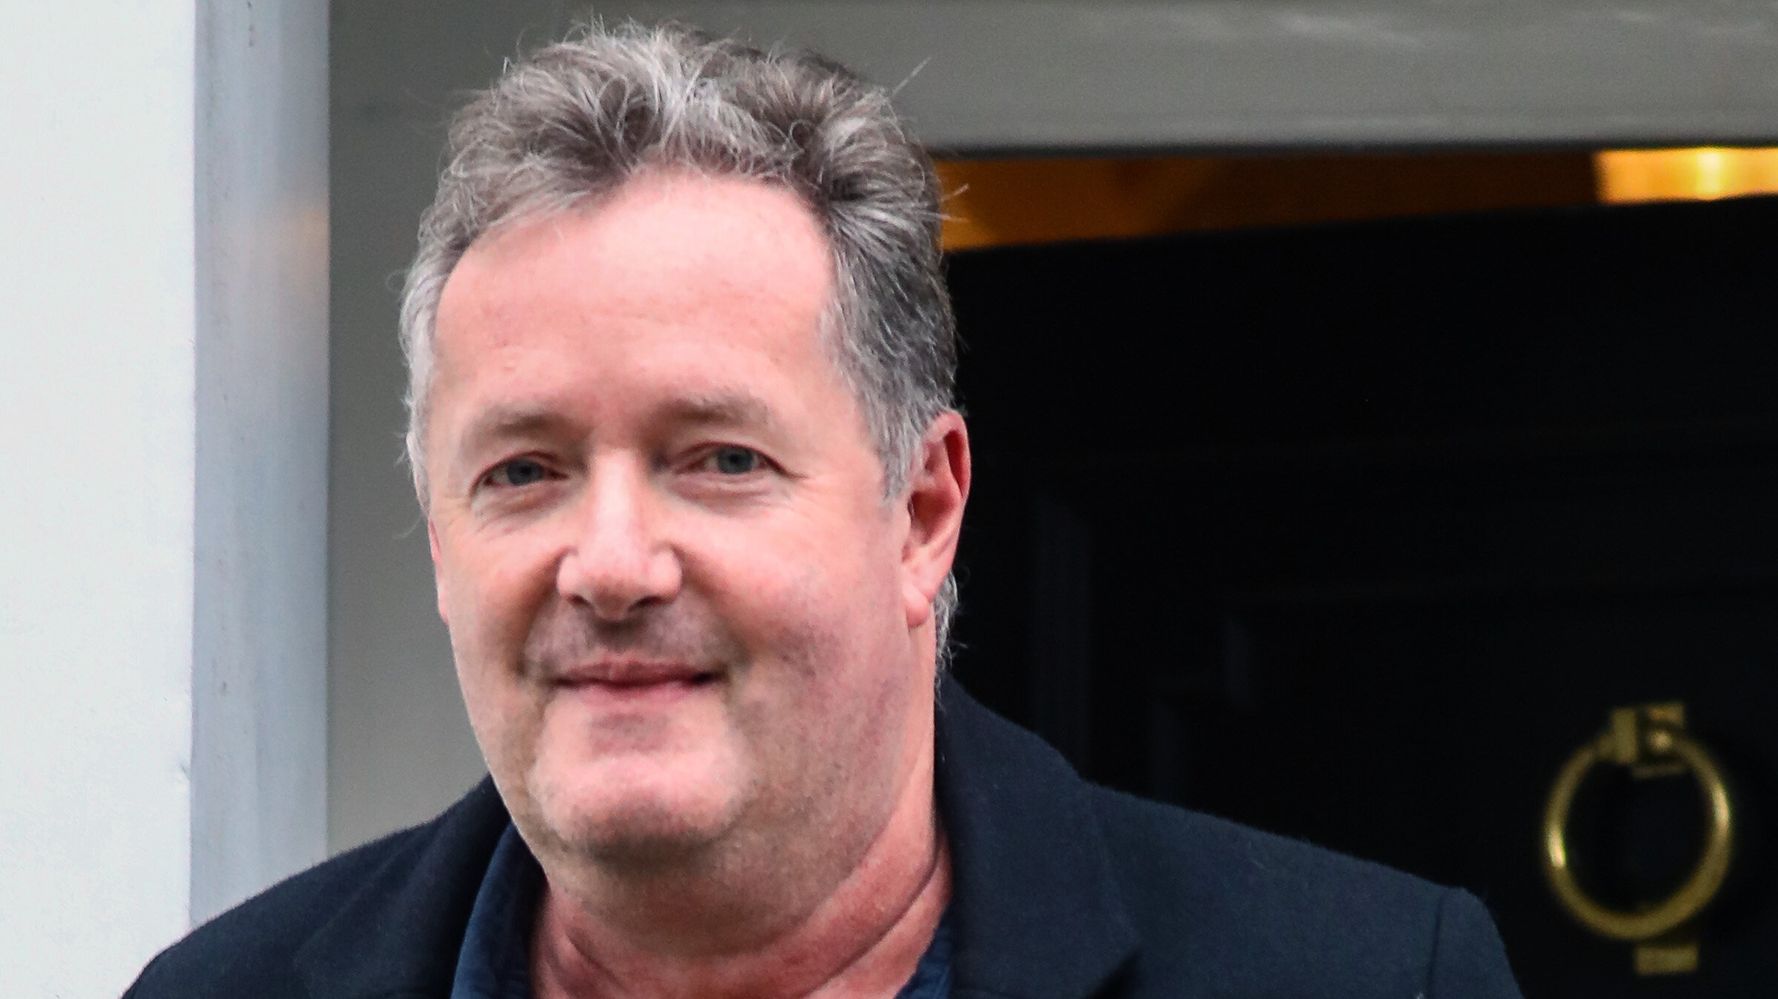 Piers Morgan claims members of the royal family thank Meghan Markle Rant